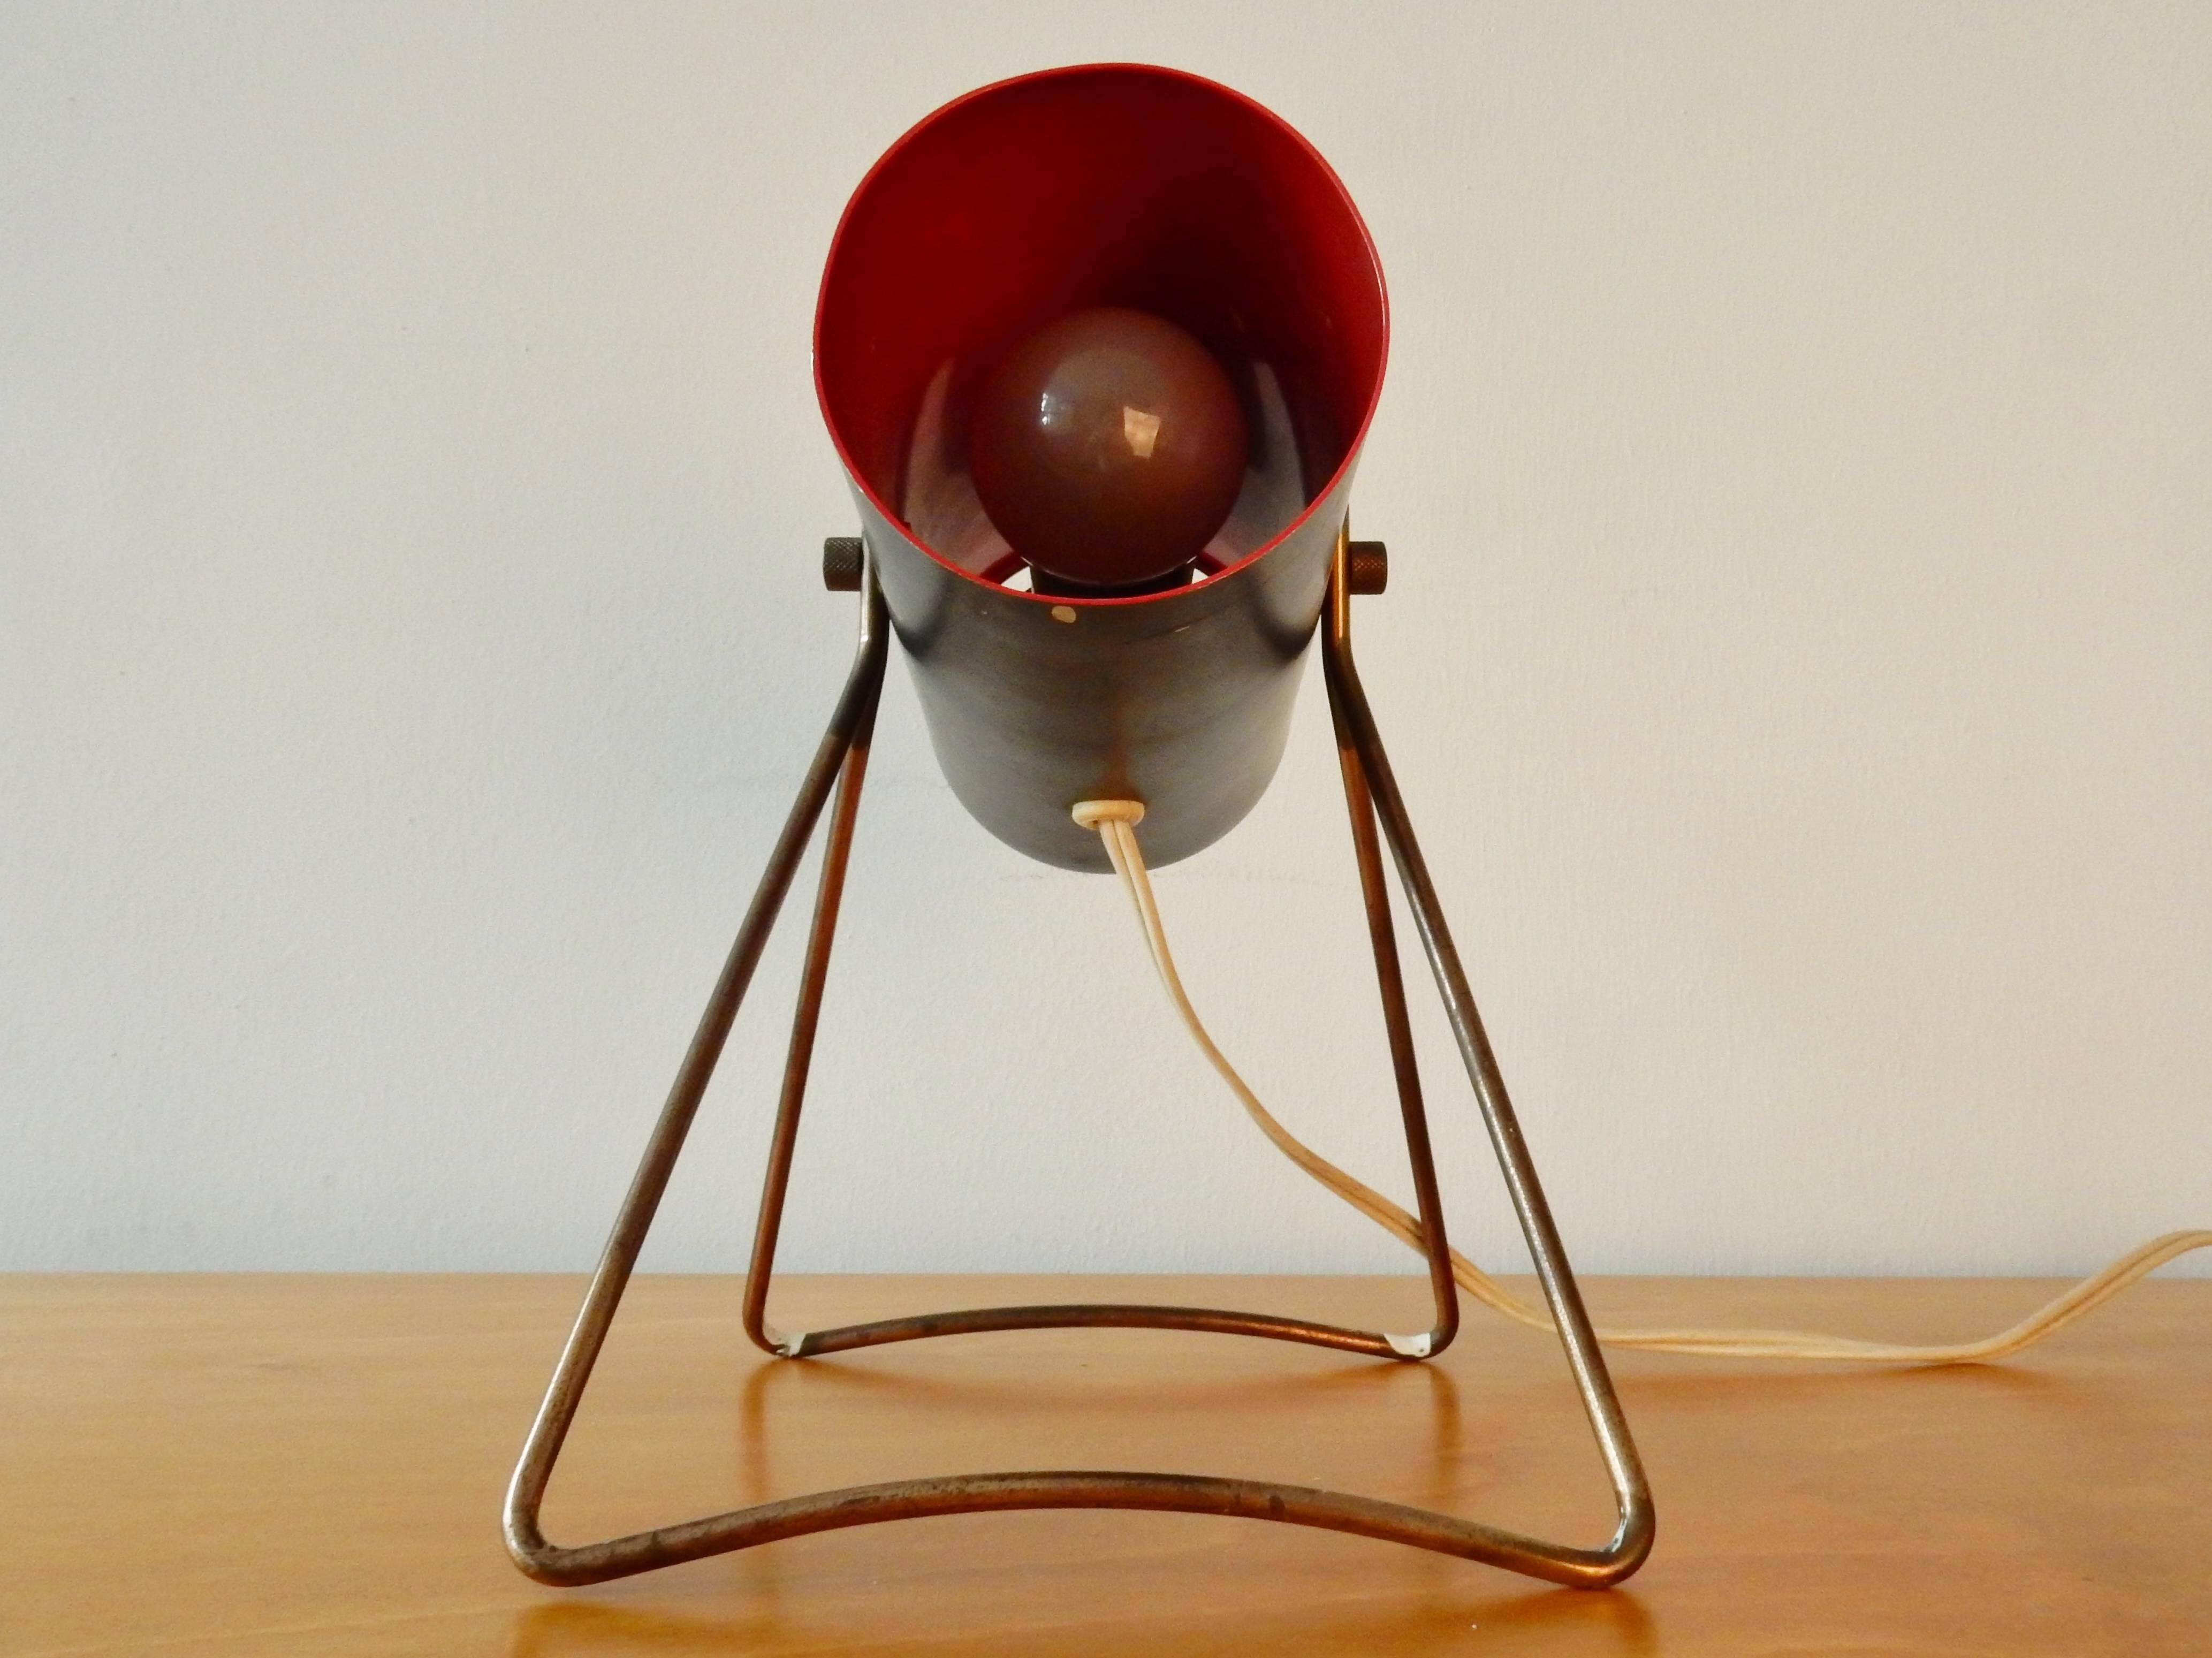 Set of Two Rare Table Lamps by Svend Aage Holm Sørensen for ASEA, Sweden, 1950s For Sale 2